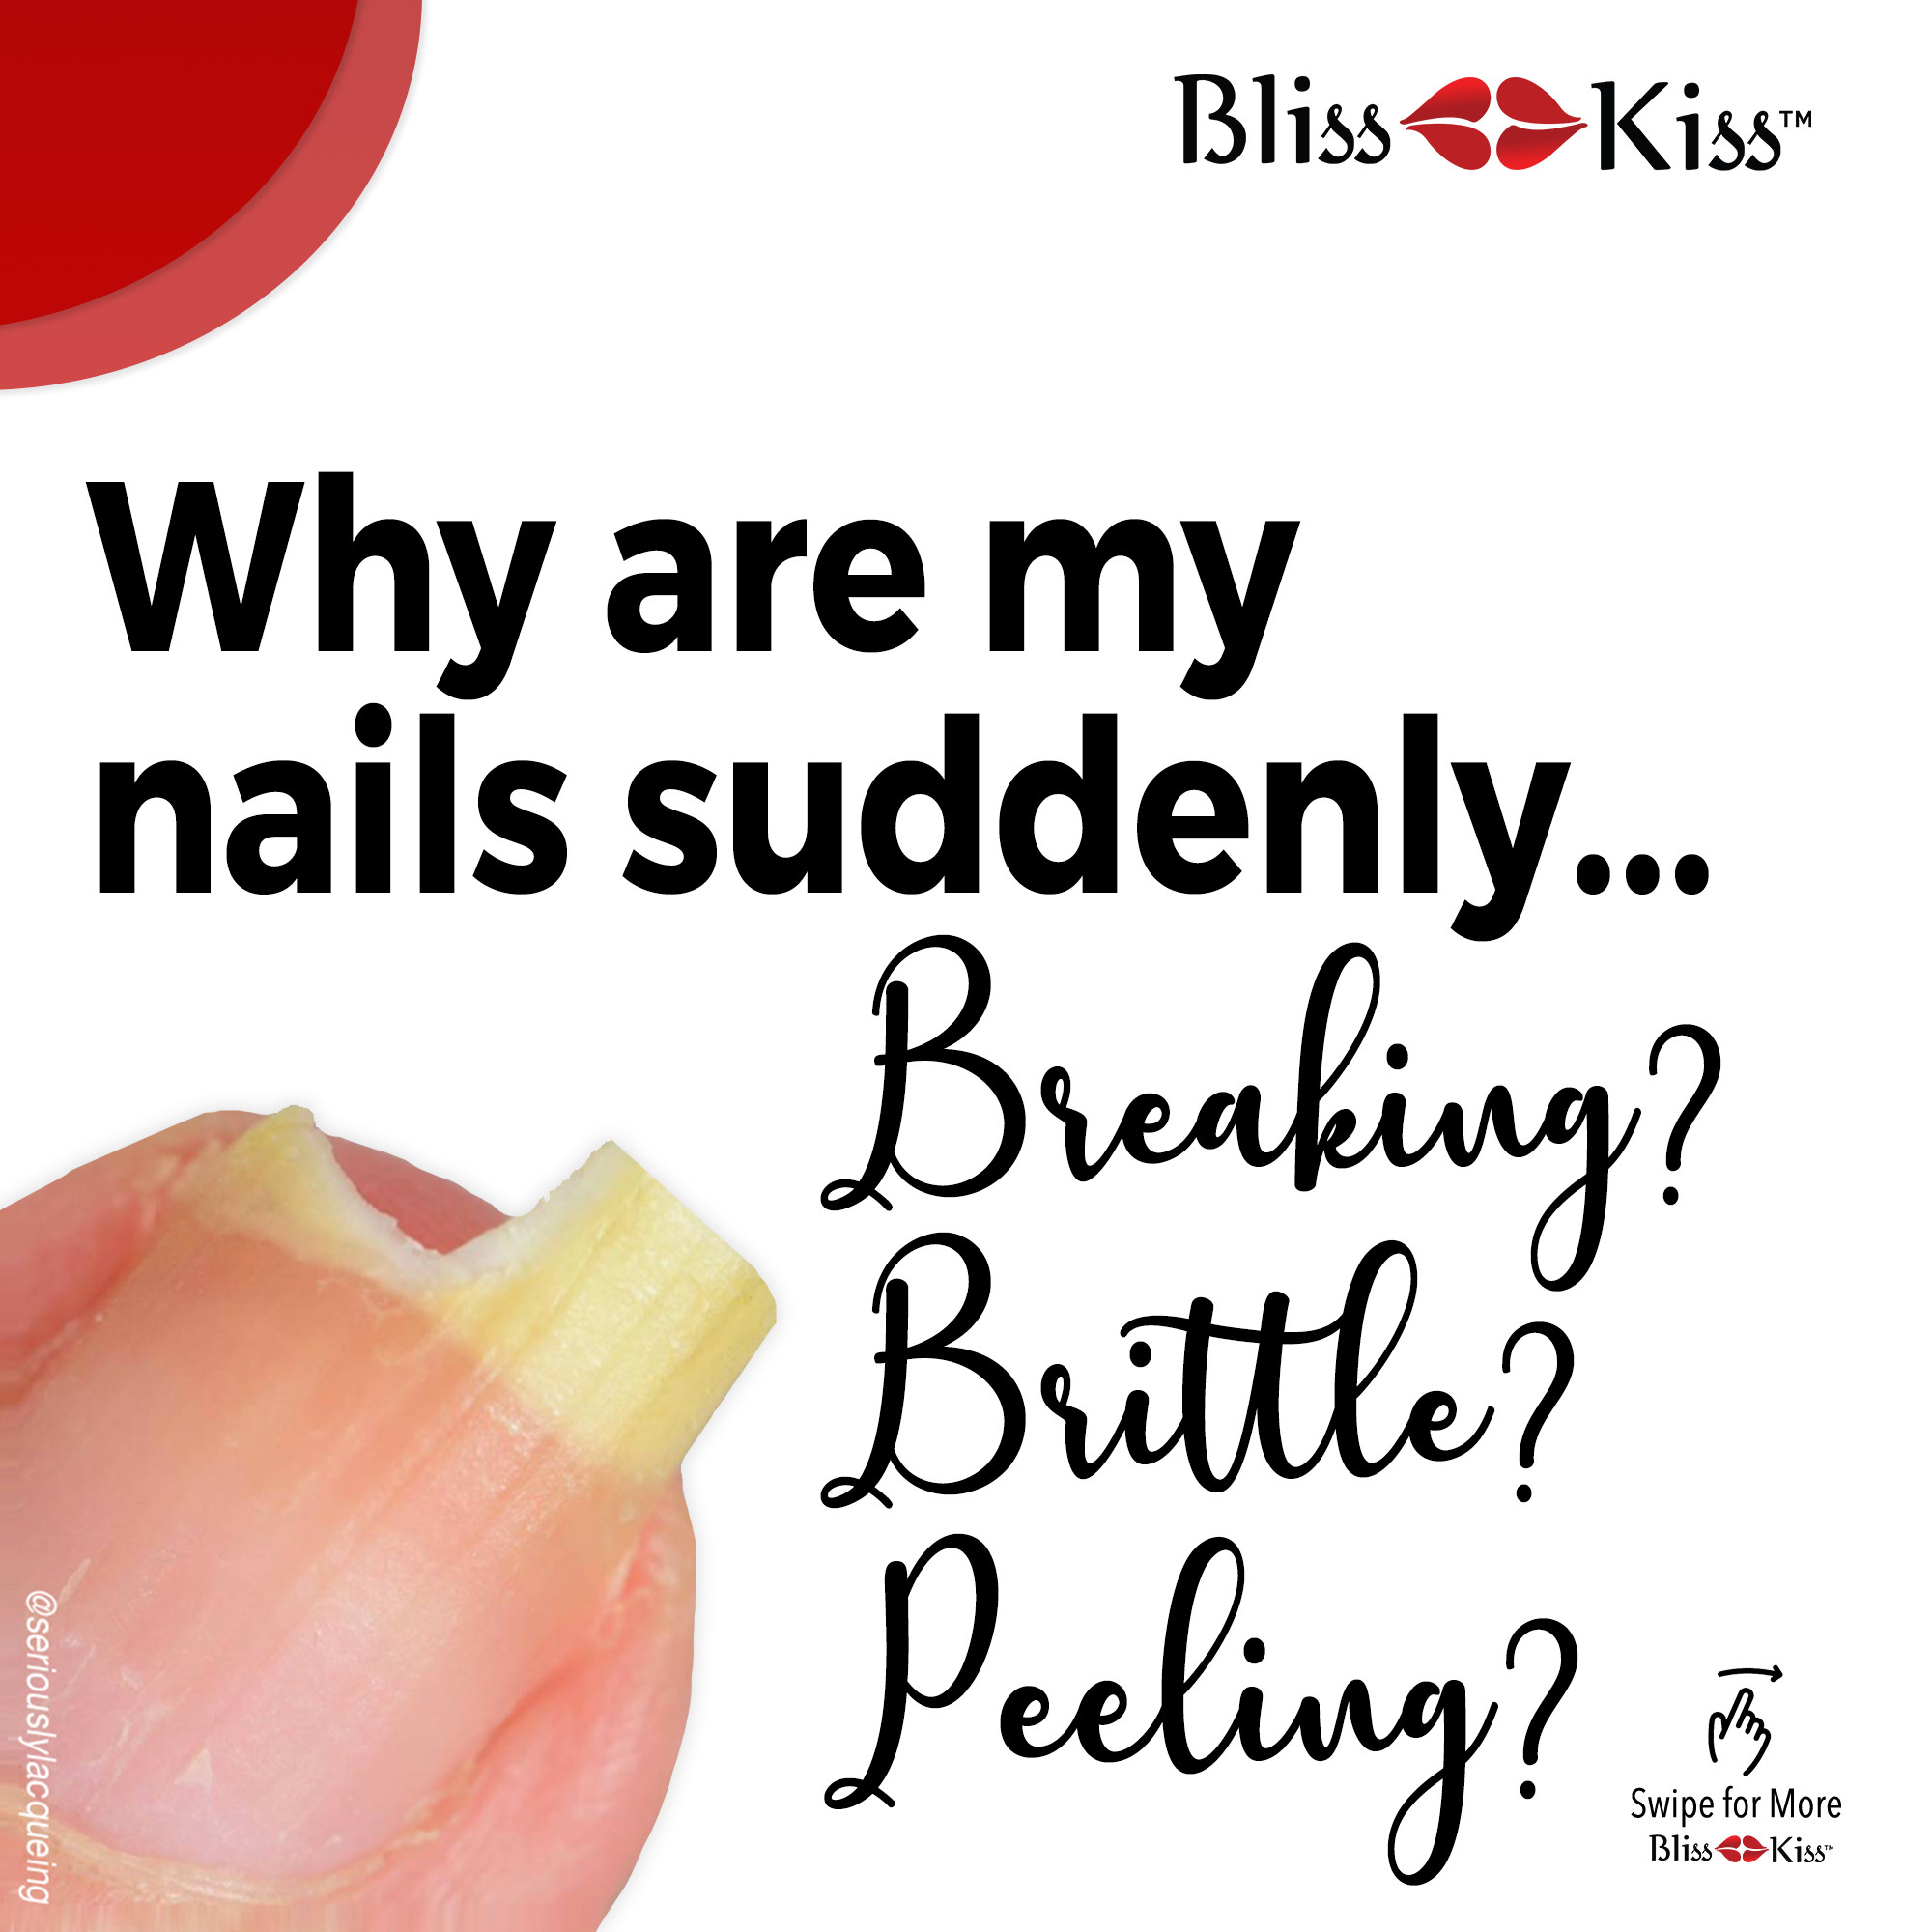 Why are my nails suddenly breaking, brittle, peeling? - Bliss Kiss by  Finely Finished, LLC